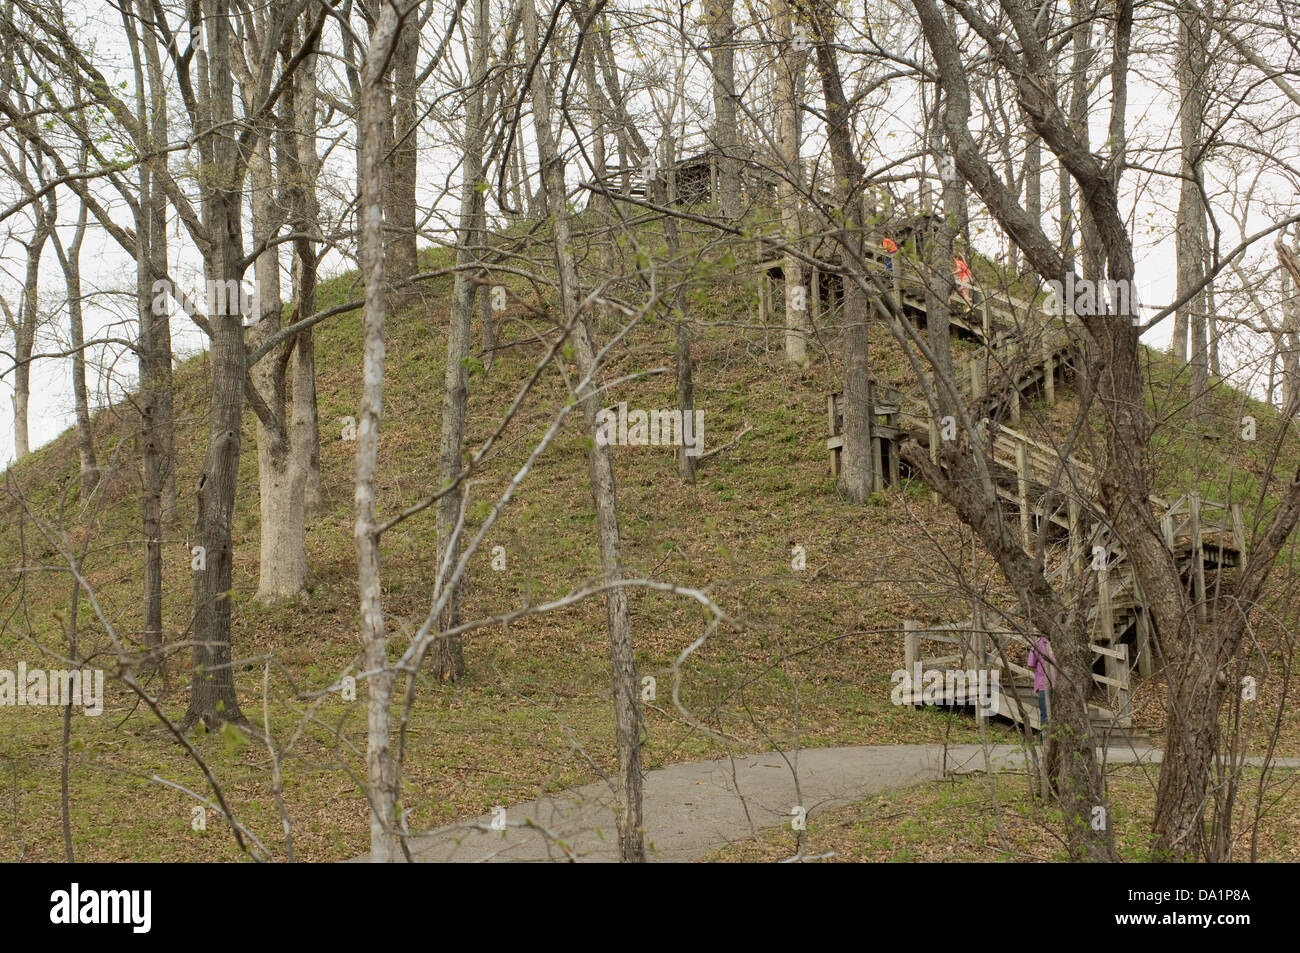 Stairway up Saul's Mound, Pinson Mounds State Park, Tennessee. Digital photograph Stock Photo